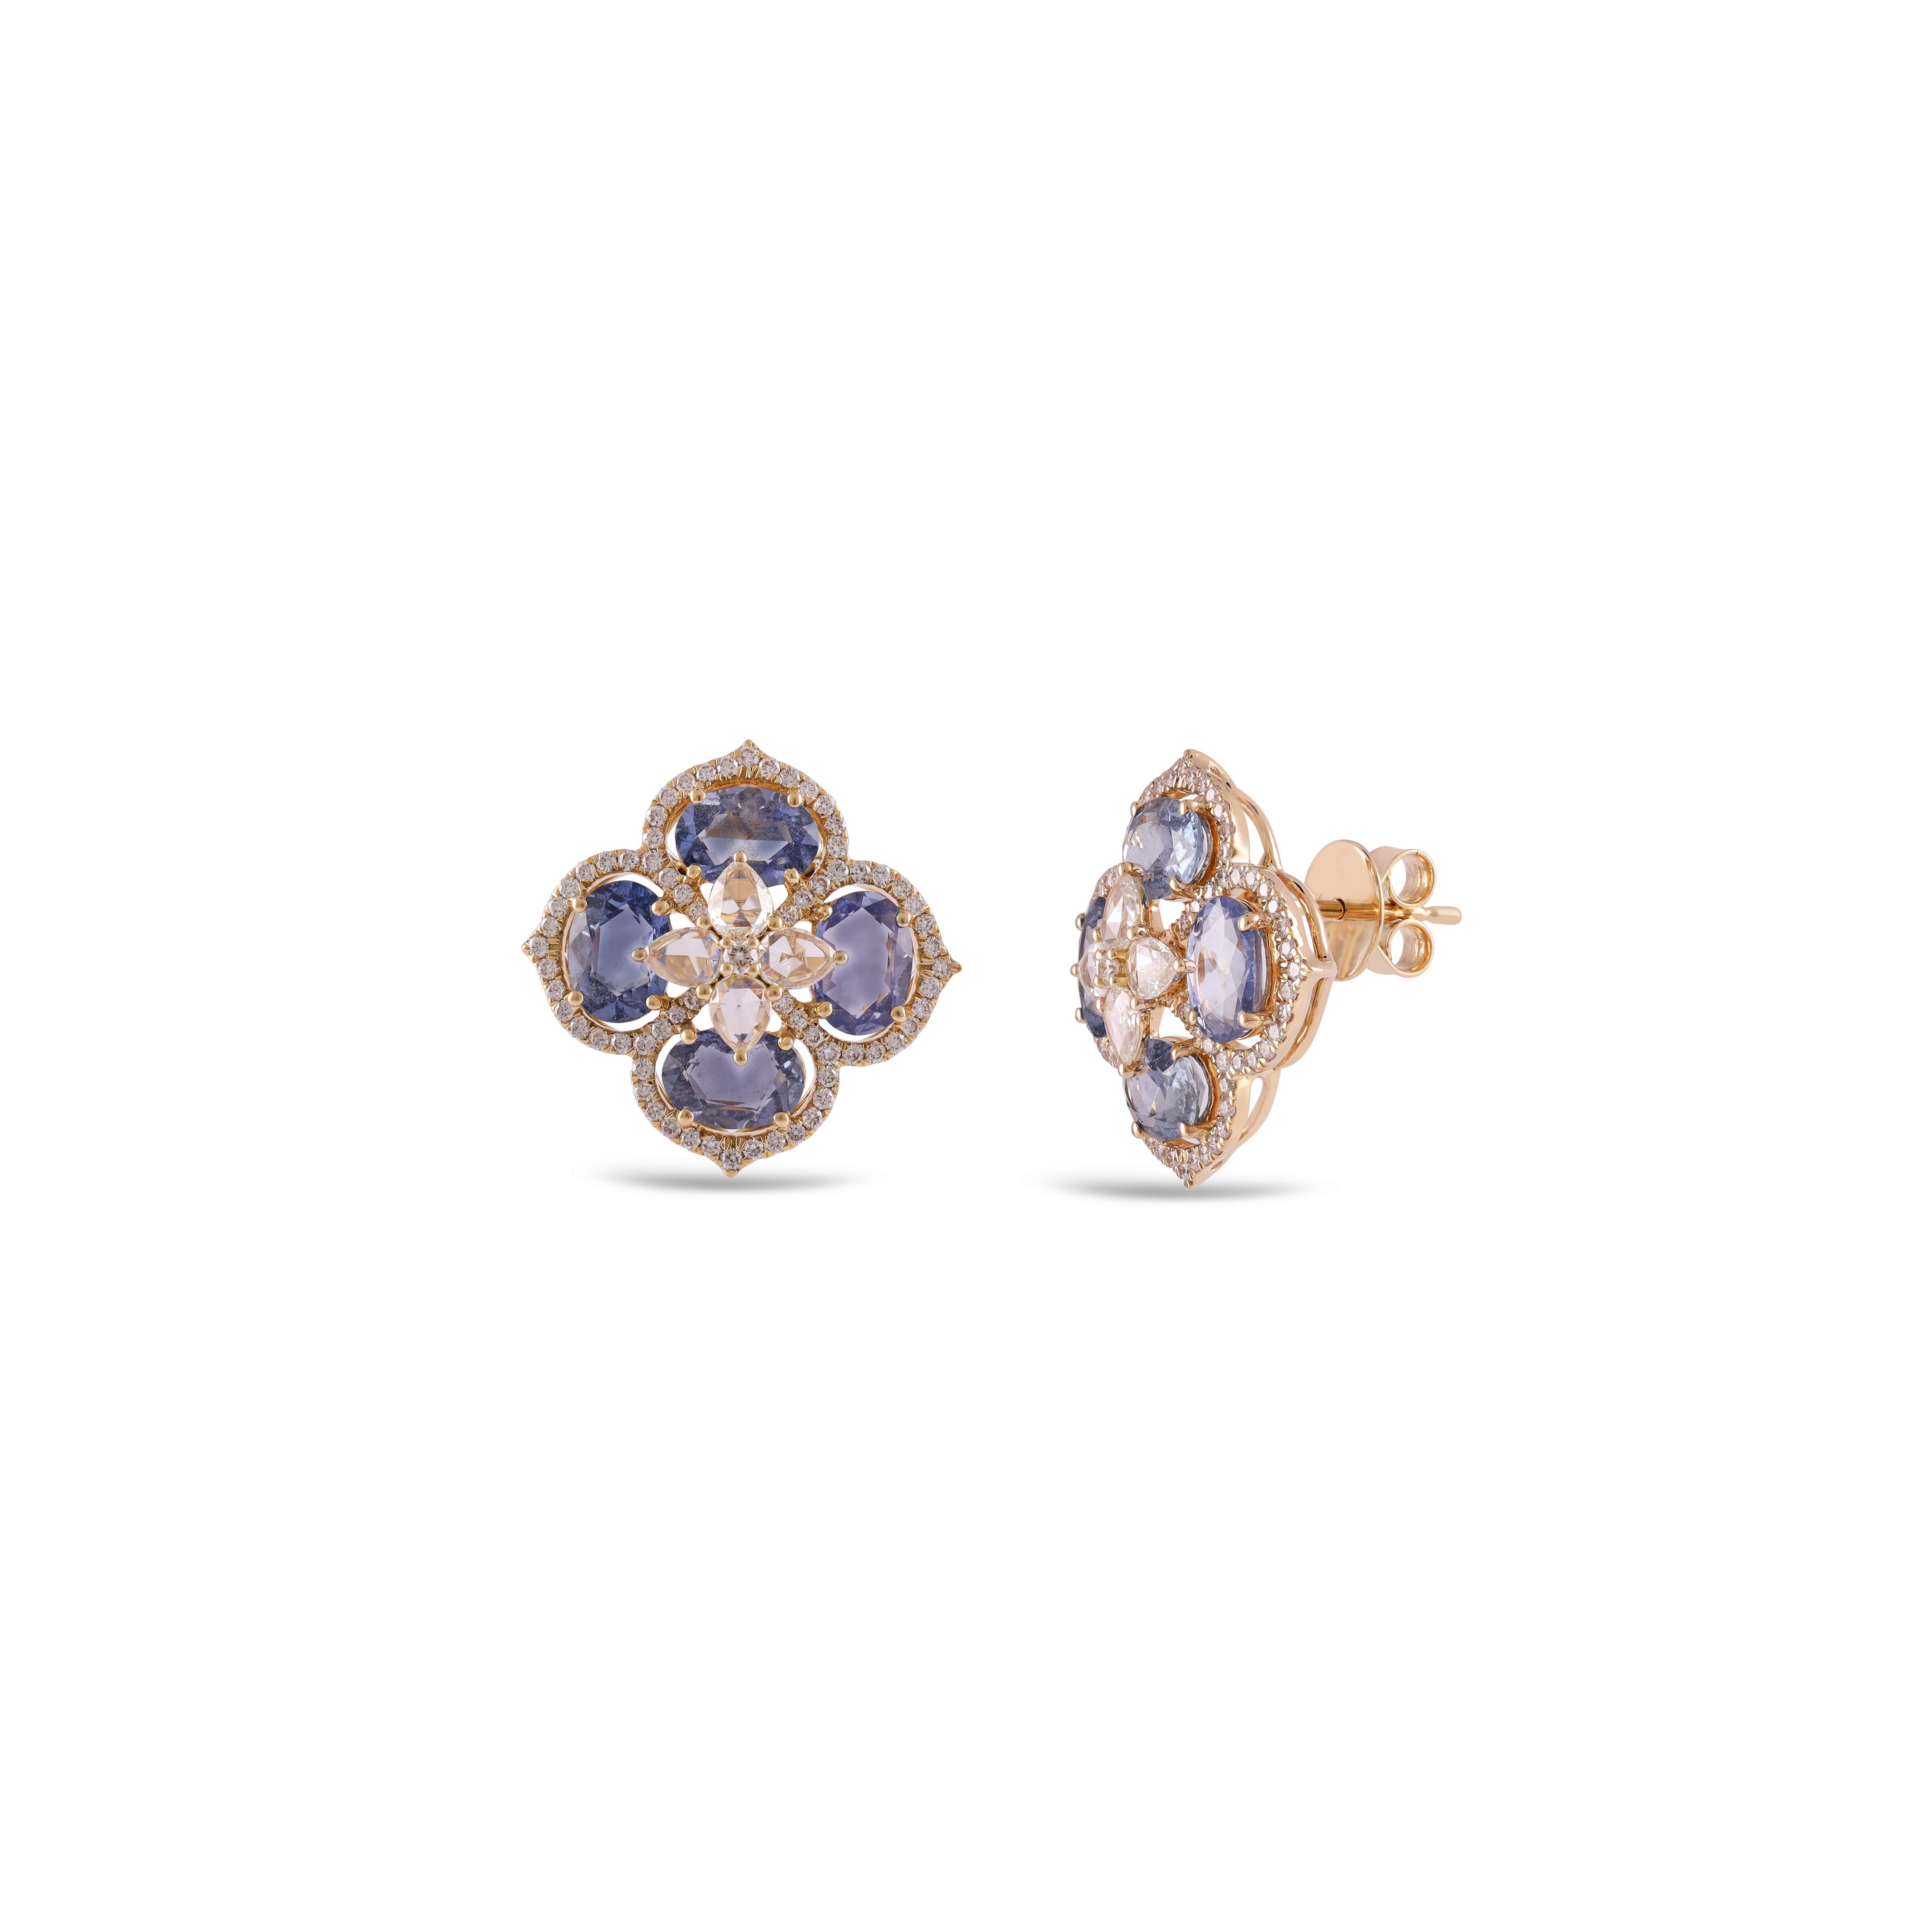 Blue Sapphire Yellow Gold Diamond Earrings
Earring.

Blue Sapphire 6.09 Cts
Diamond 1.33 Cts


Custom Services
Resizing is available.
Request Customization
